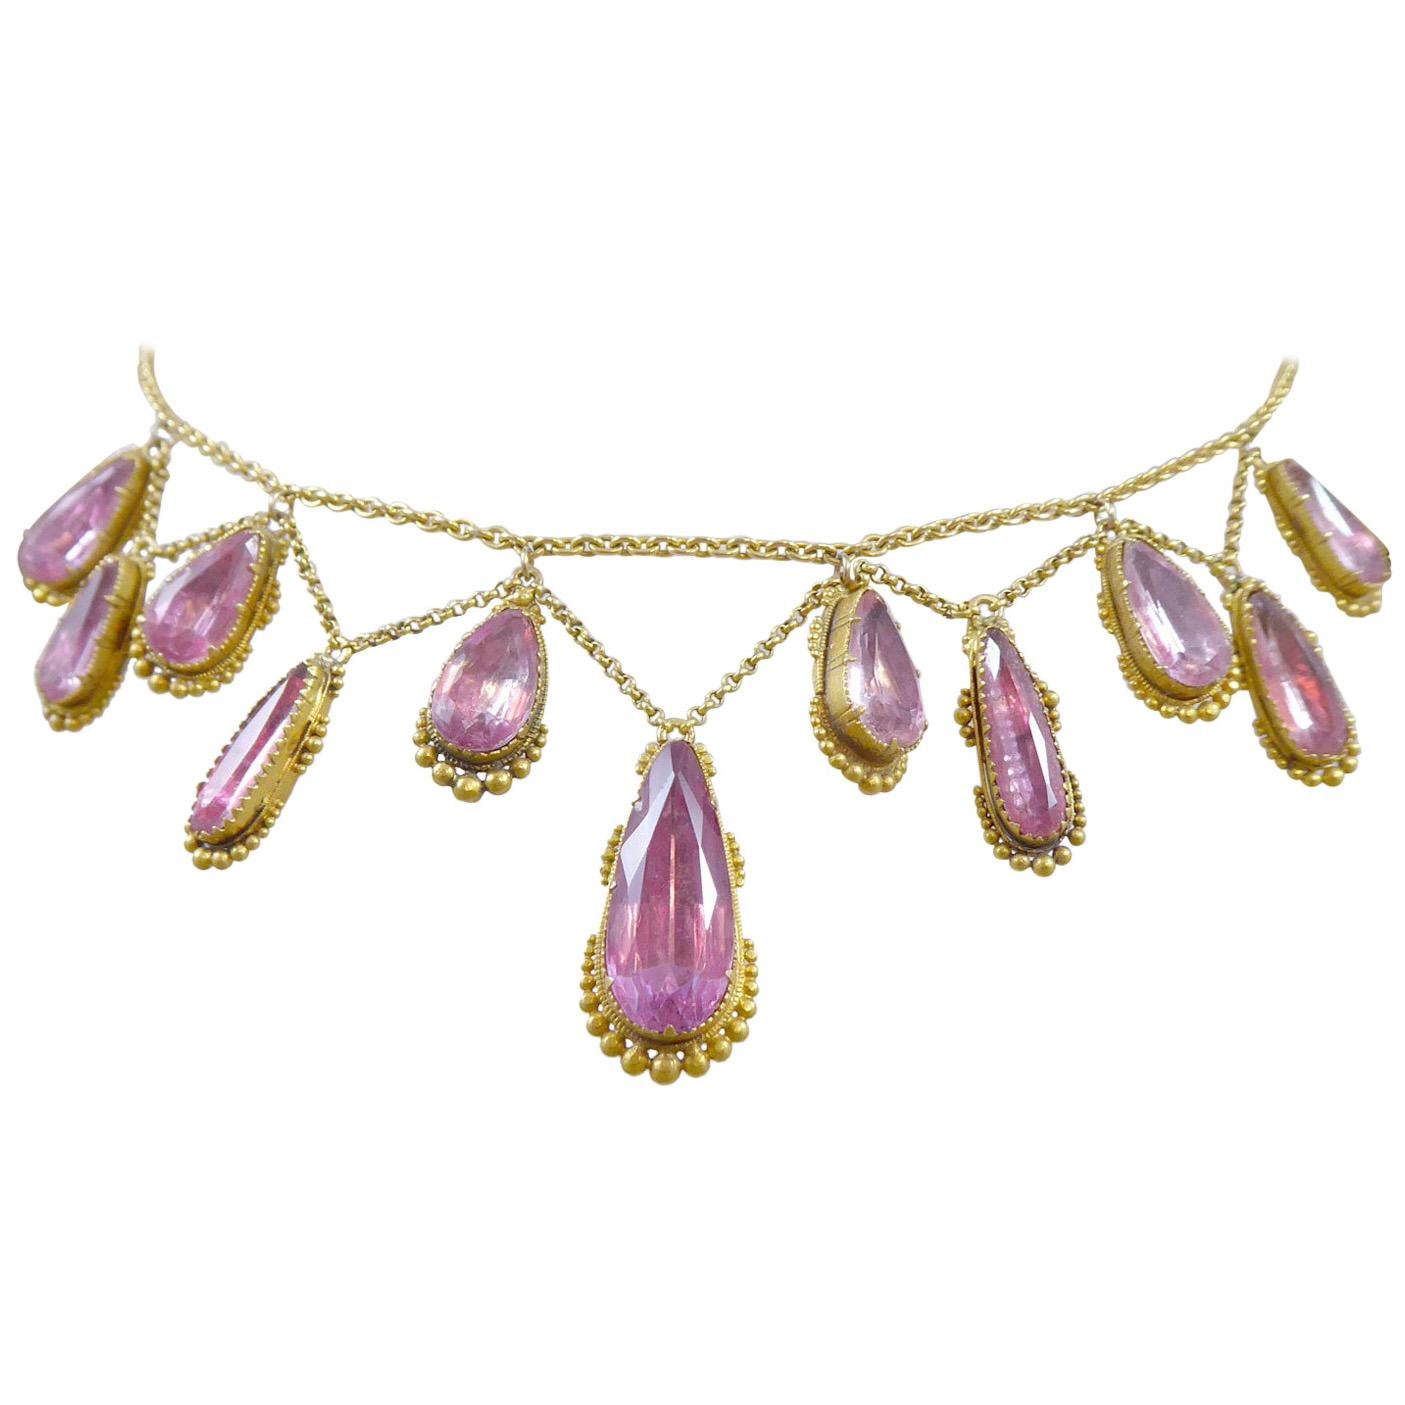 Antique Pear Shaped Pink Topaz Garland Necklace, circa 1850s